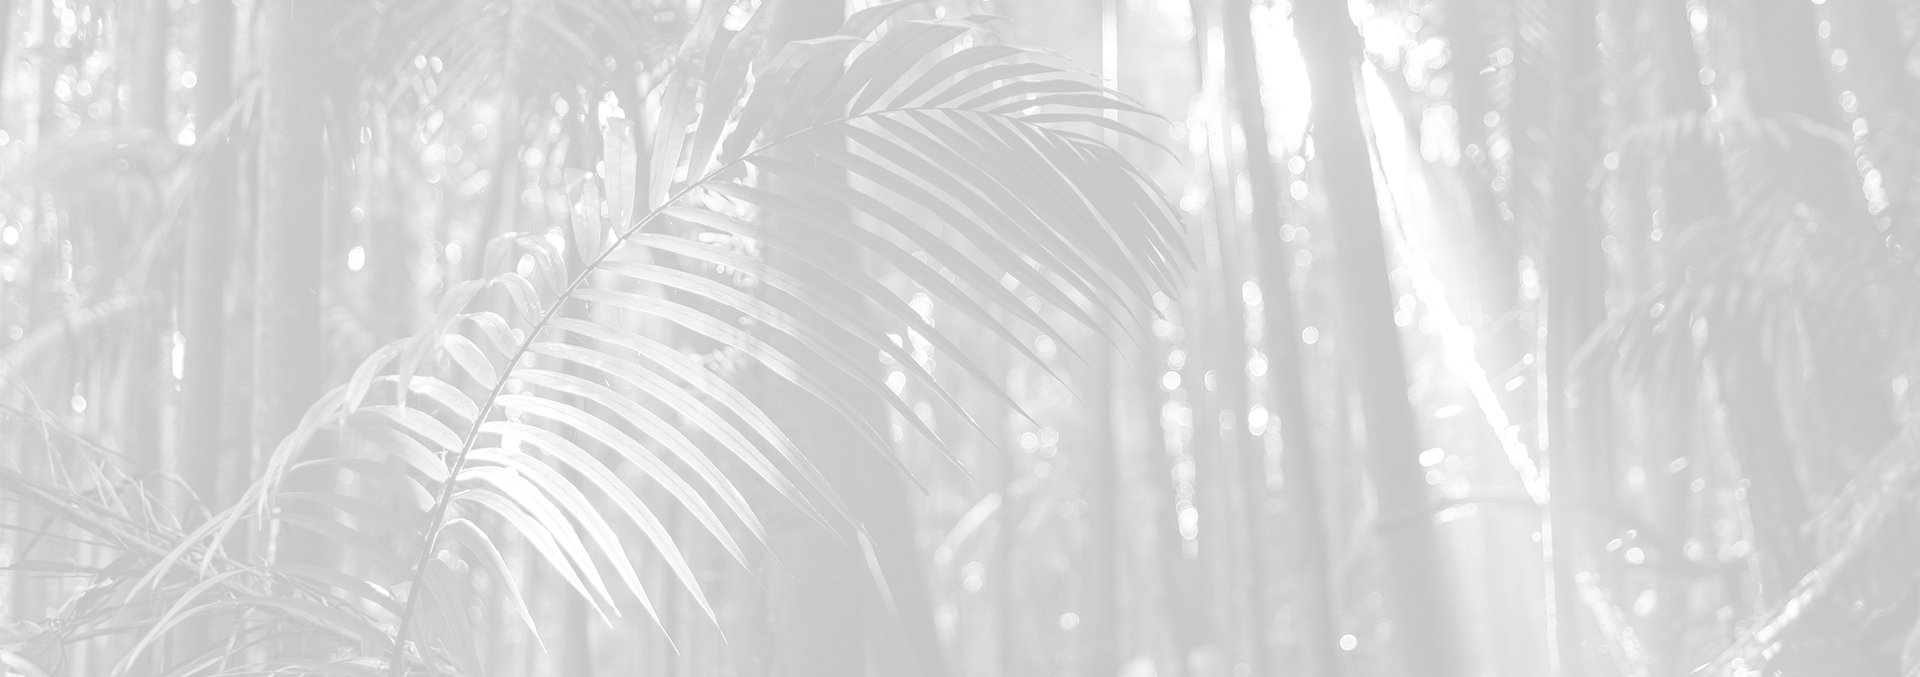 A light grey scale image of a palm situated within a tropical rainforest.